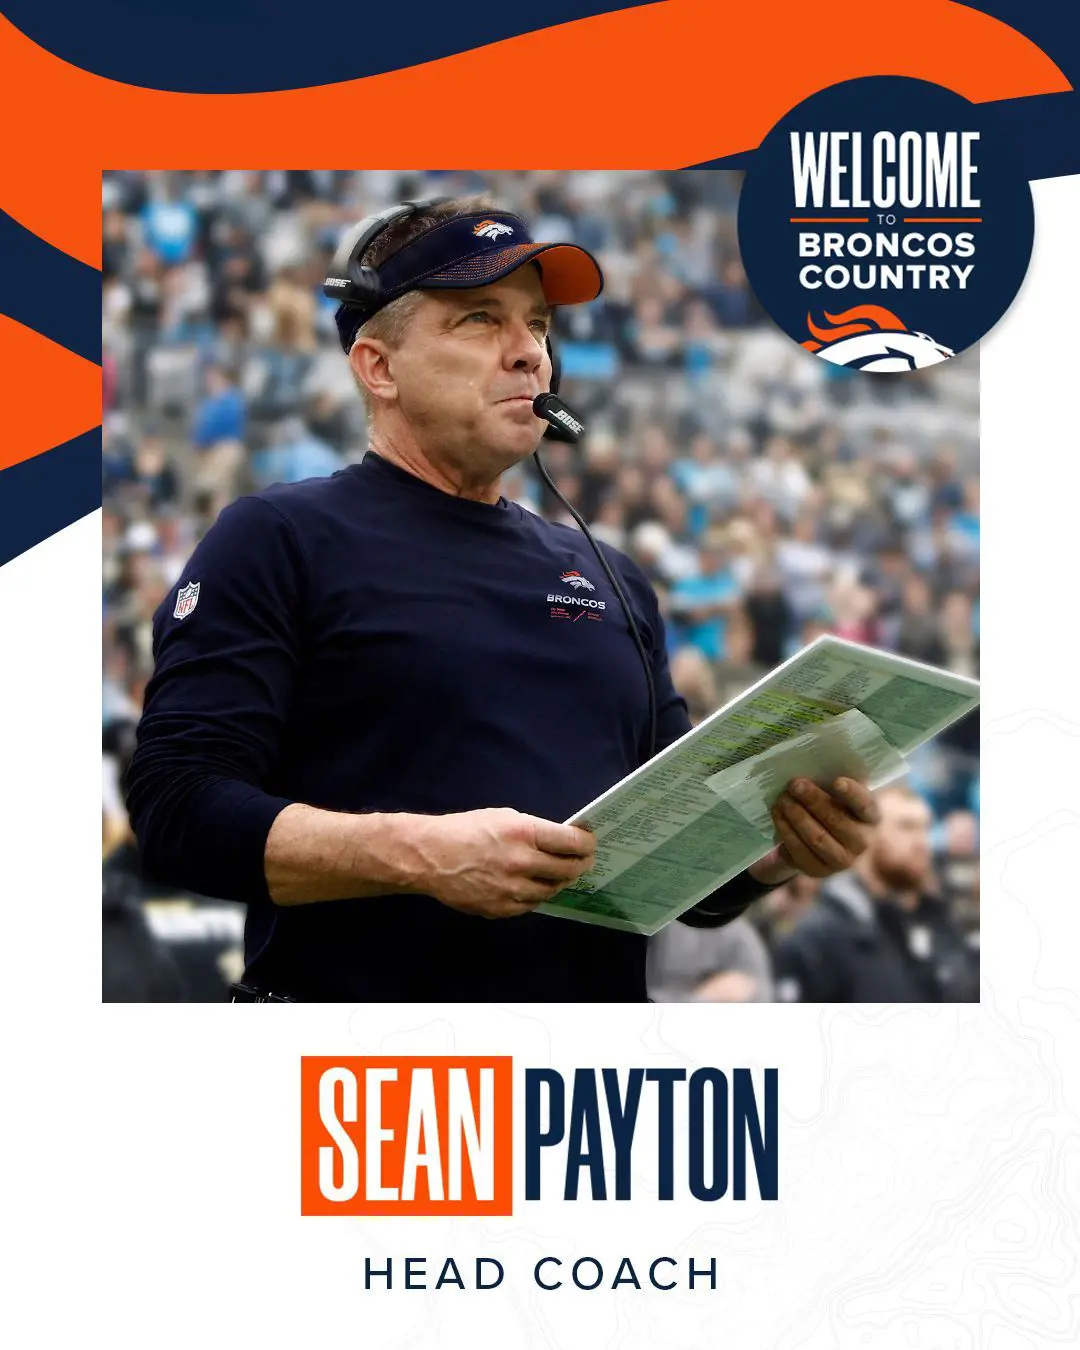 Payton receives a warm welcome from the Broncos after being hired, he has selected a team of veteran and youngbloods